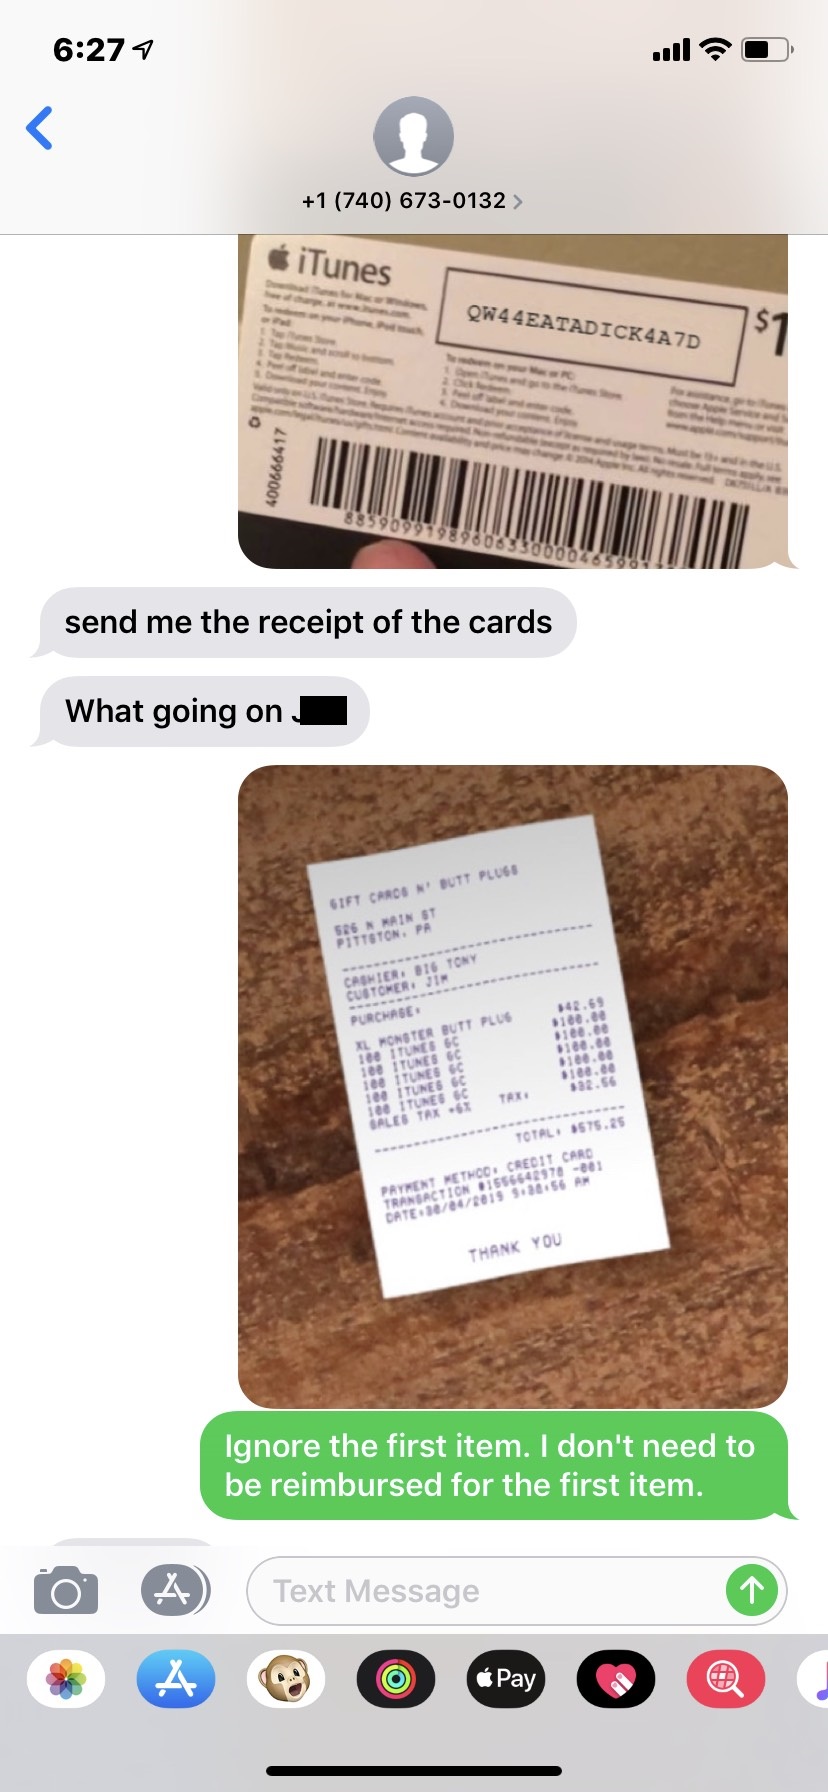 screenshot - 7 1 740 6730132 iTunes QW44EATADICK4A7D To 400666417 859099798980633000026599 send me the receipt of the cards What going on Gift Crros N' Butt Pluss 526 N Mainst Pittston. Pa Coolers, Sh. Tony Purchase Butt Plus TOTAL1575.25 Credit Card Paym